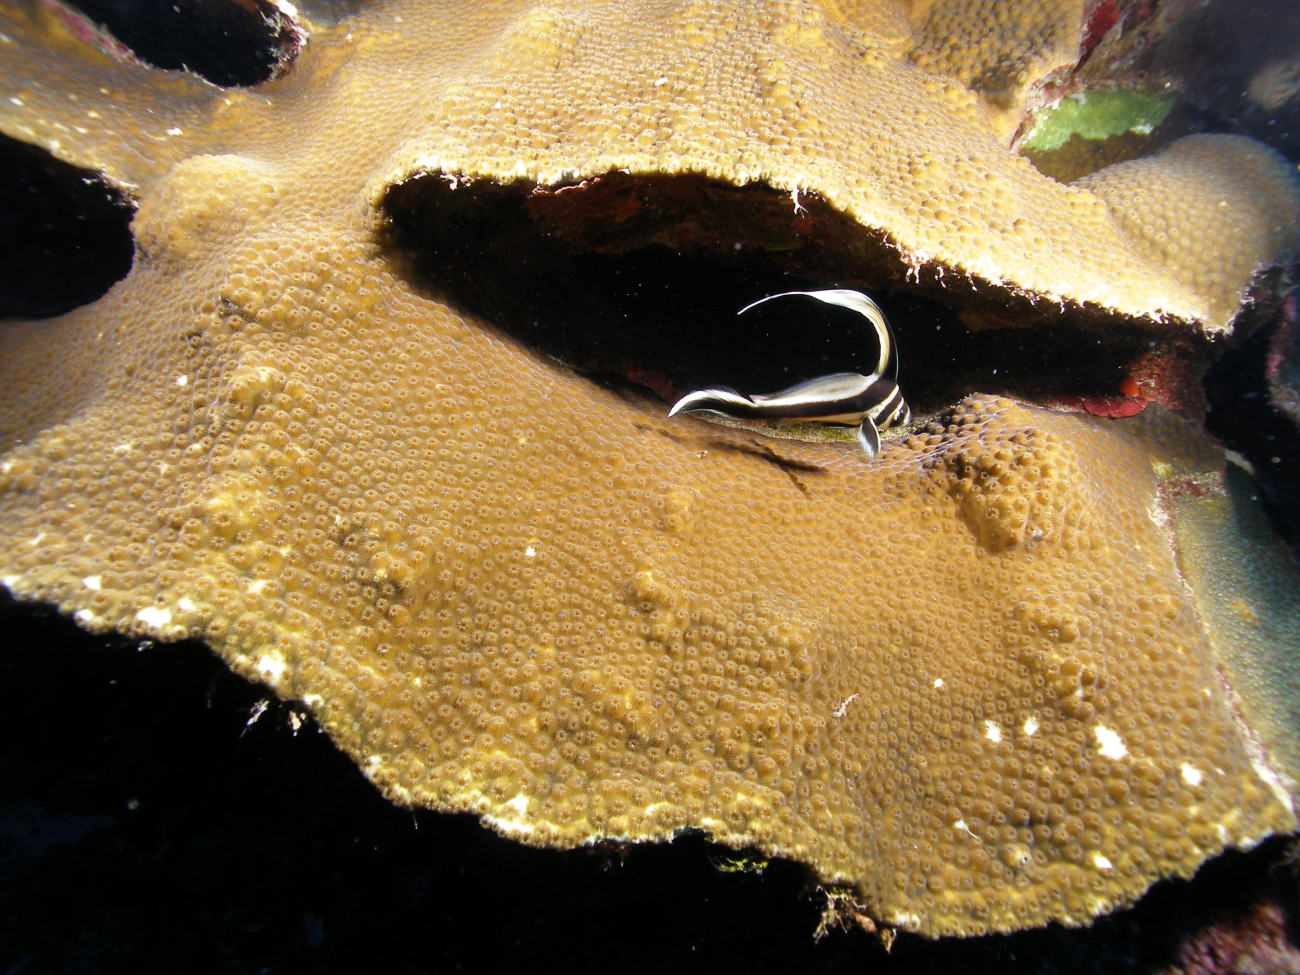 A spotted drum juvenile skirts along the coral